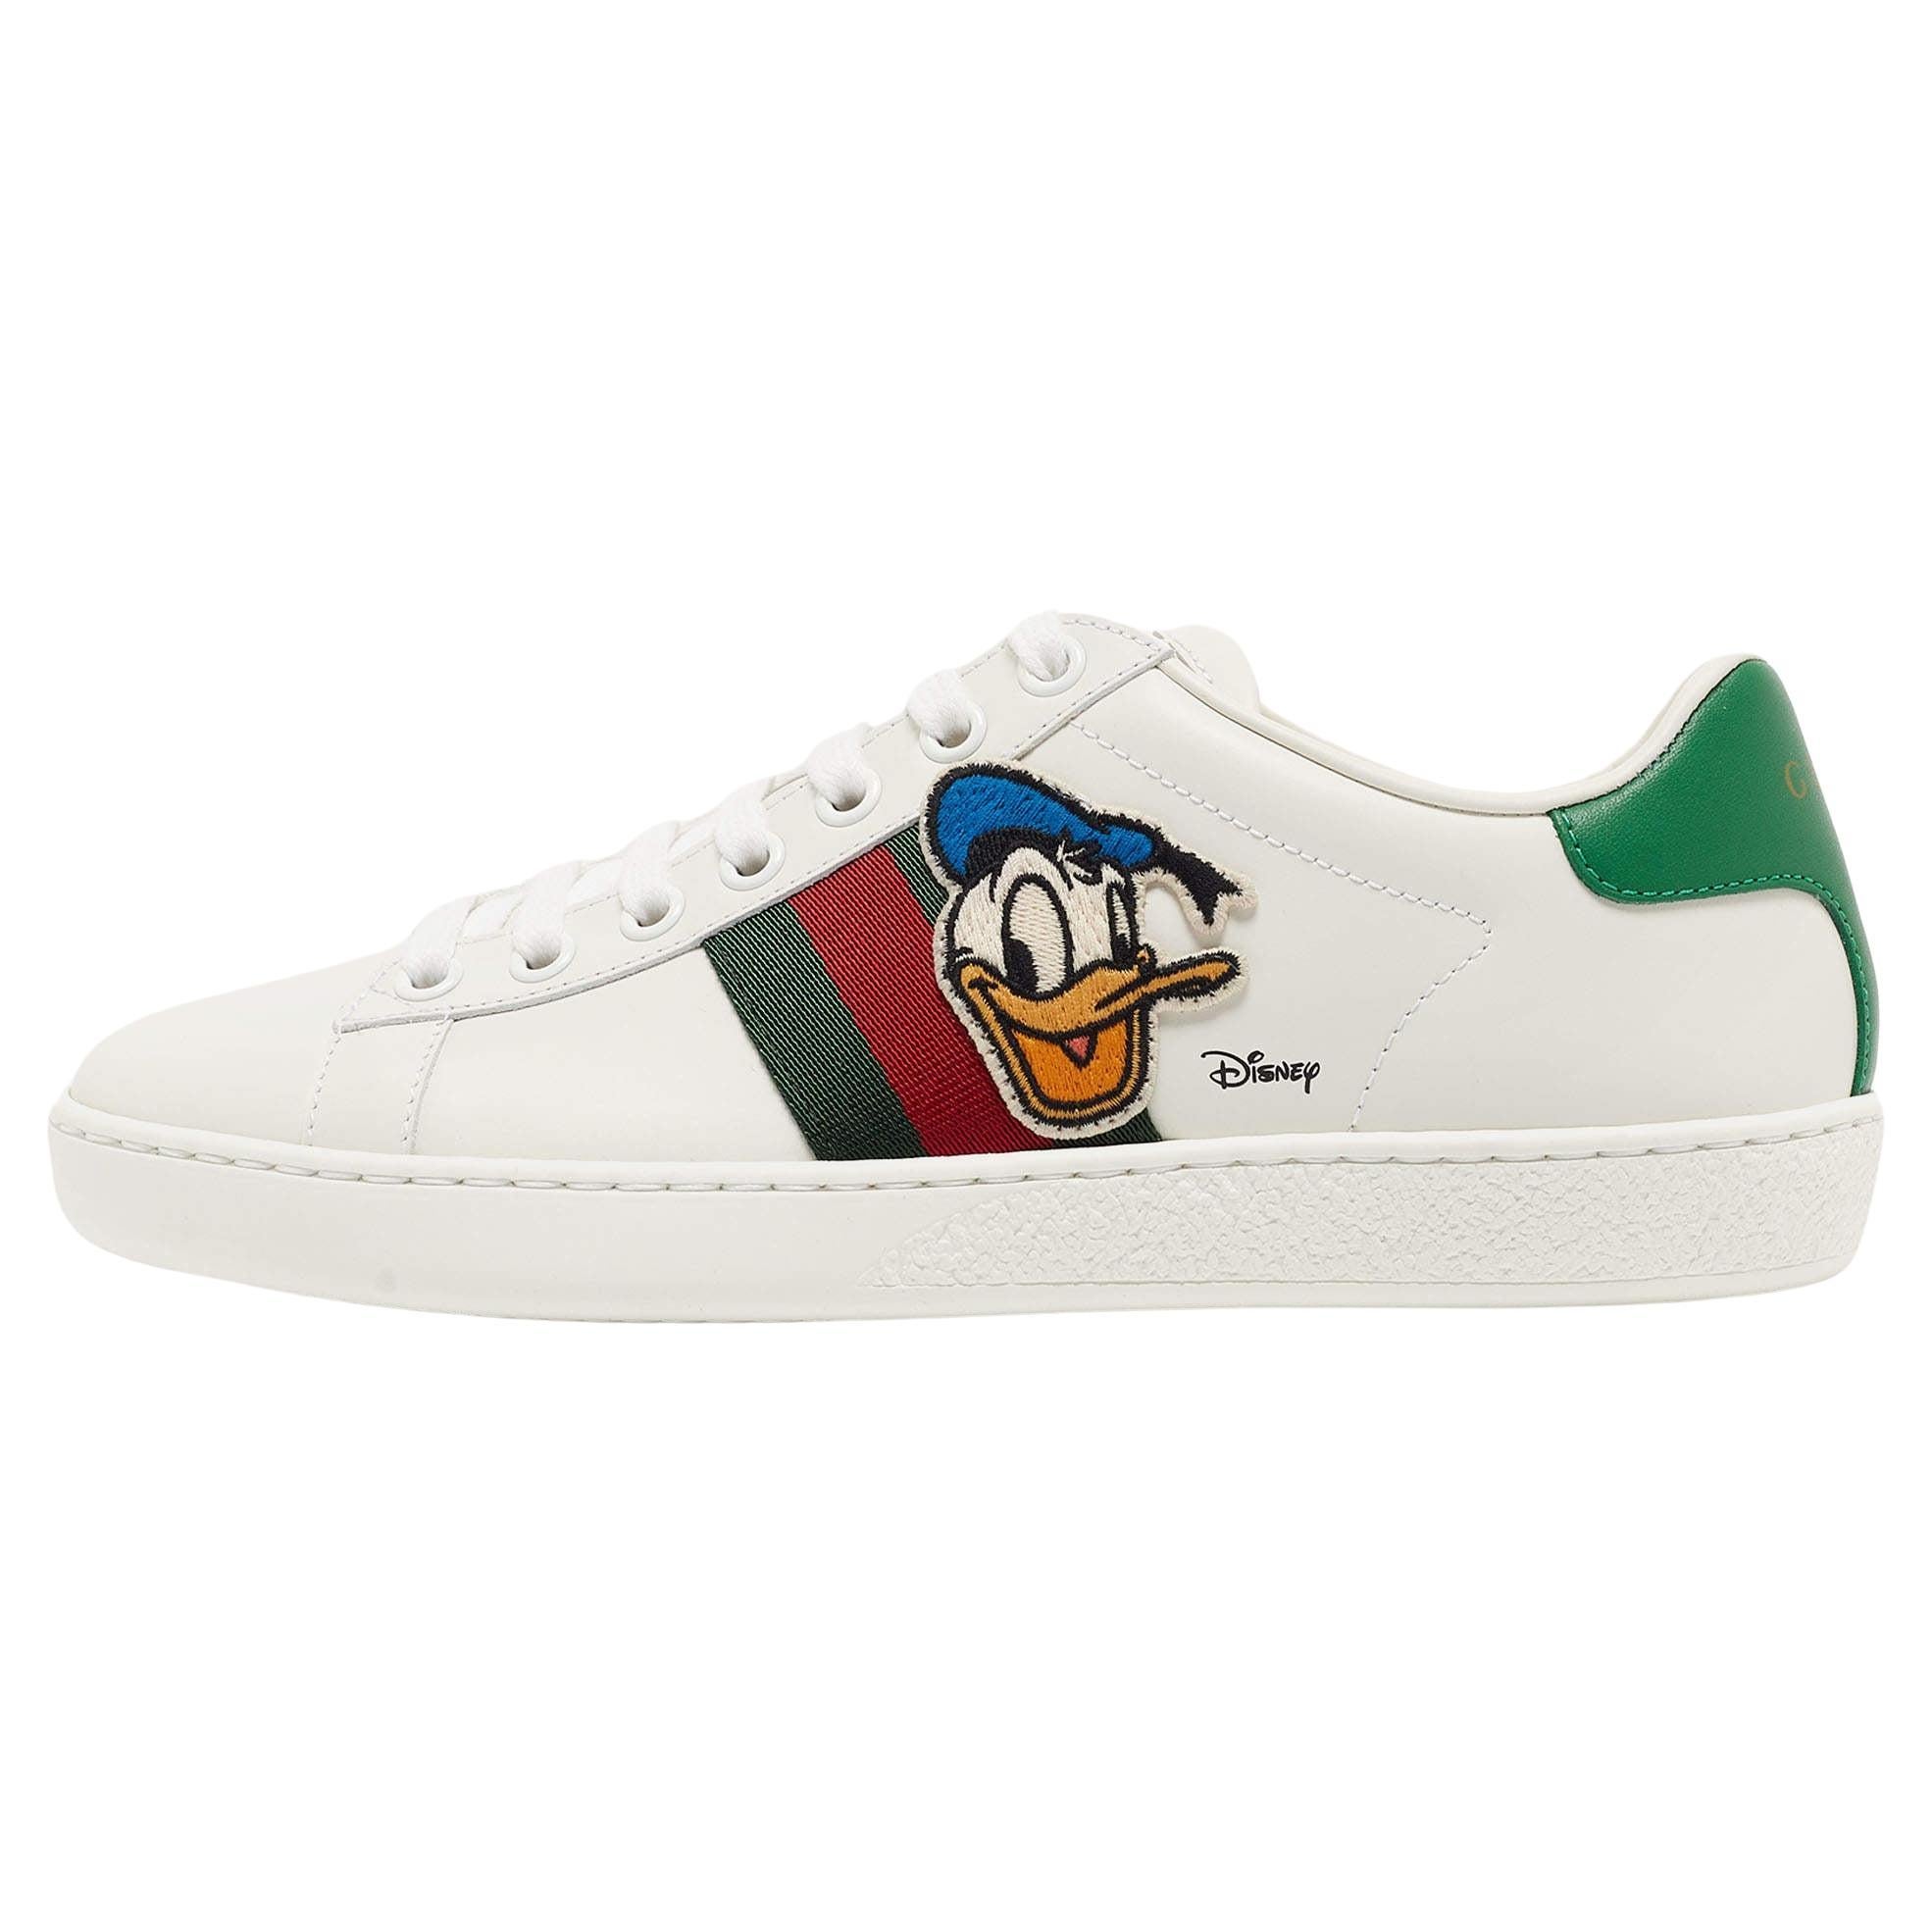 Gucci x Disney White Leather Donald Duck Ace Sneakers Size 34.5 For Sale